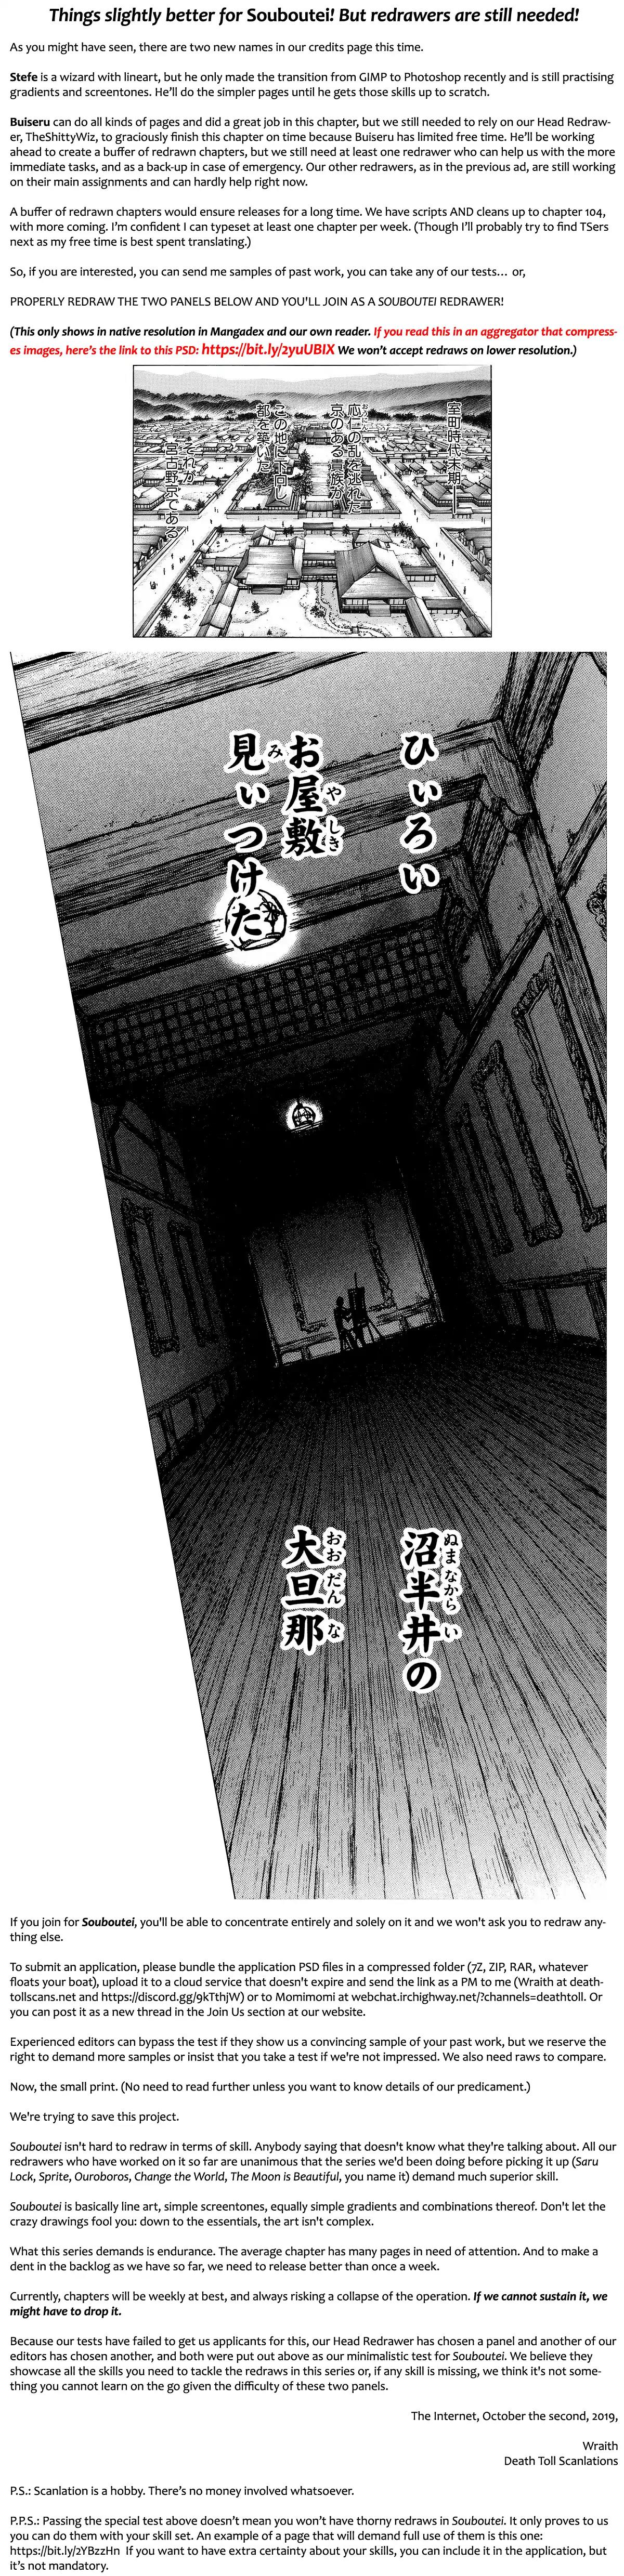 Souboutei Must Be Destroyed Chapter 86: